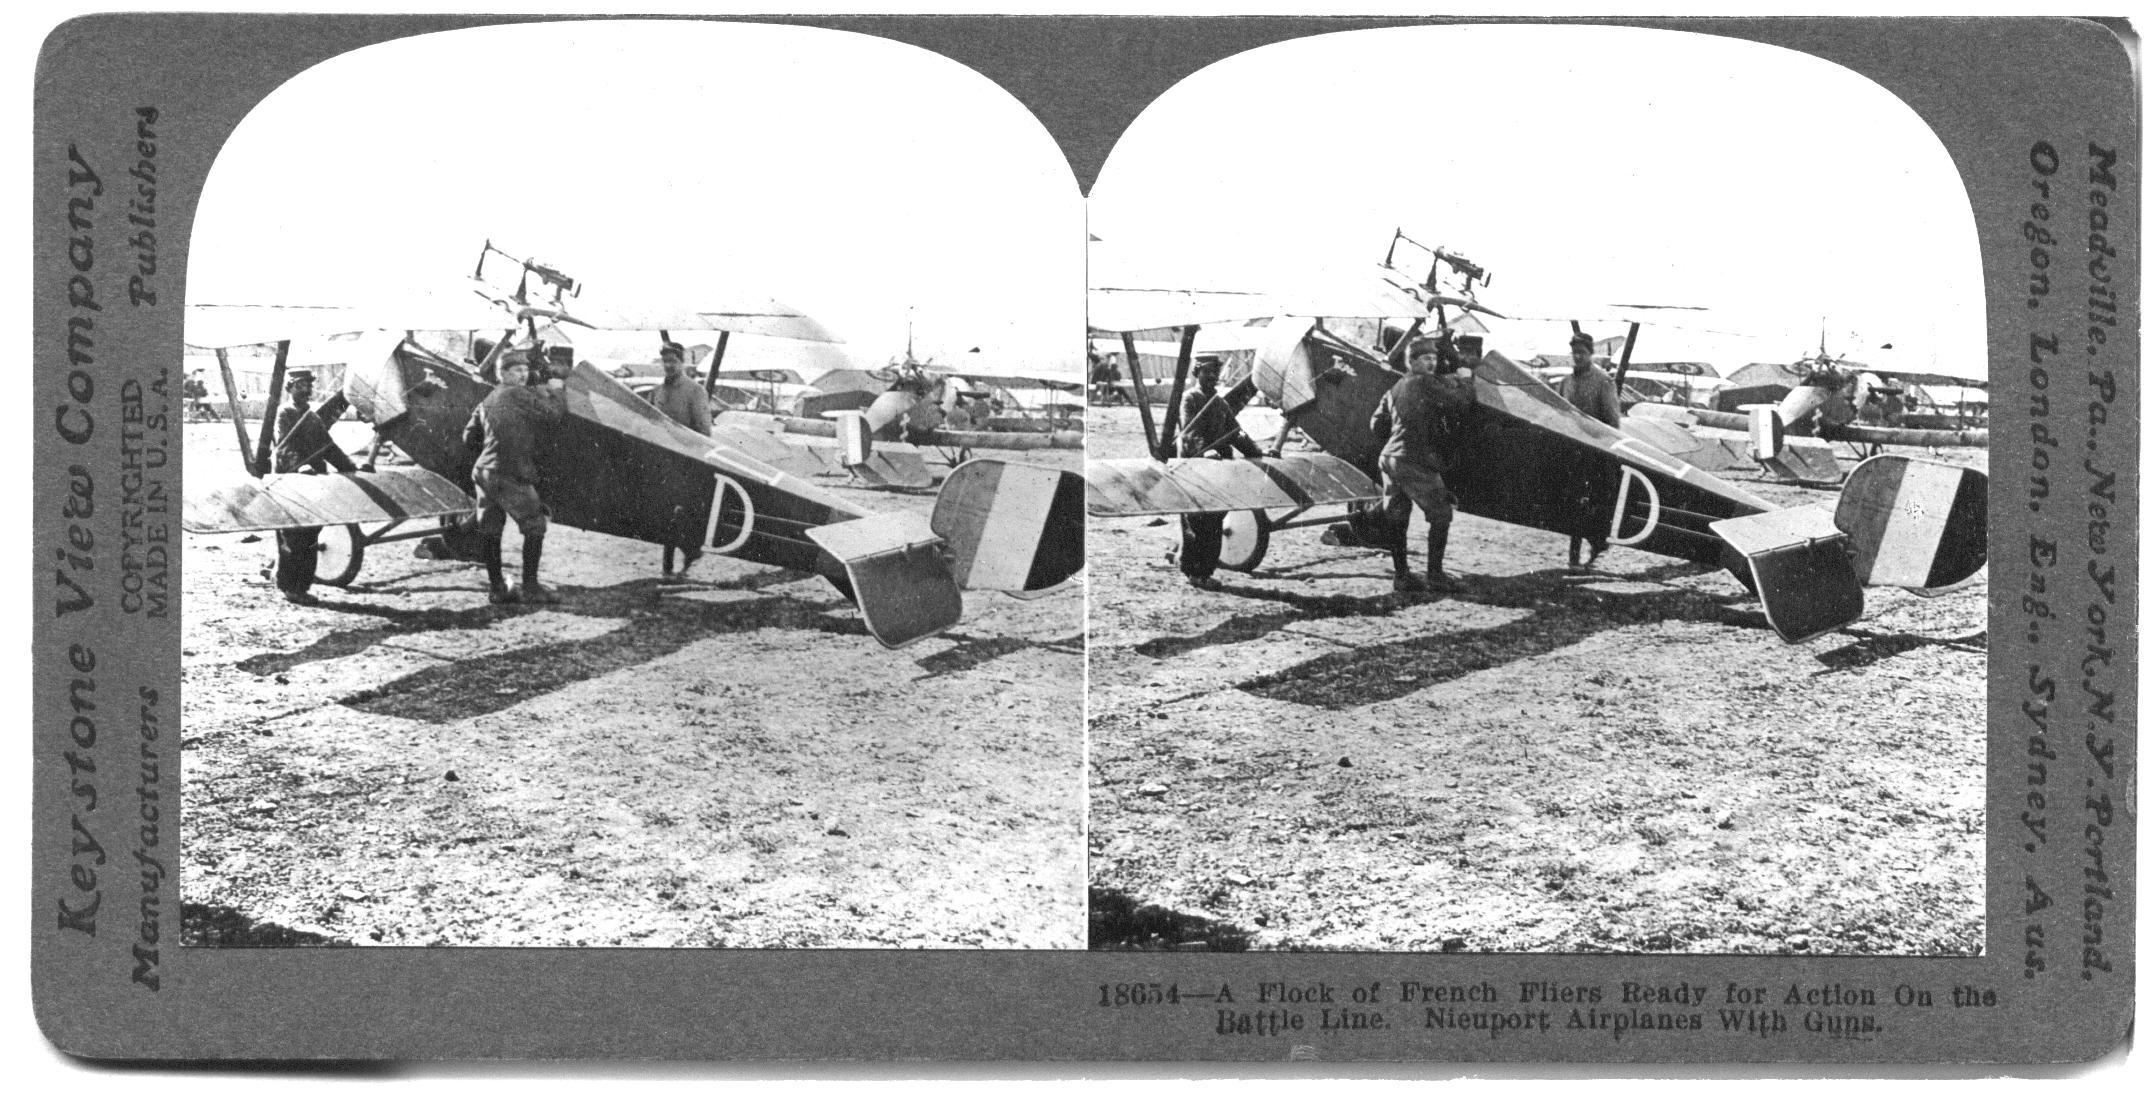 A Flock of French Fliers Ready for Action On the Battle Line. Nieuport Airplanes With Guns